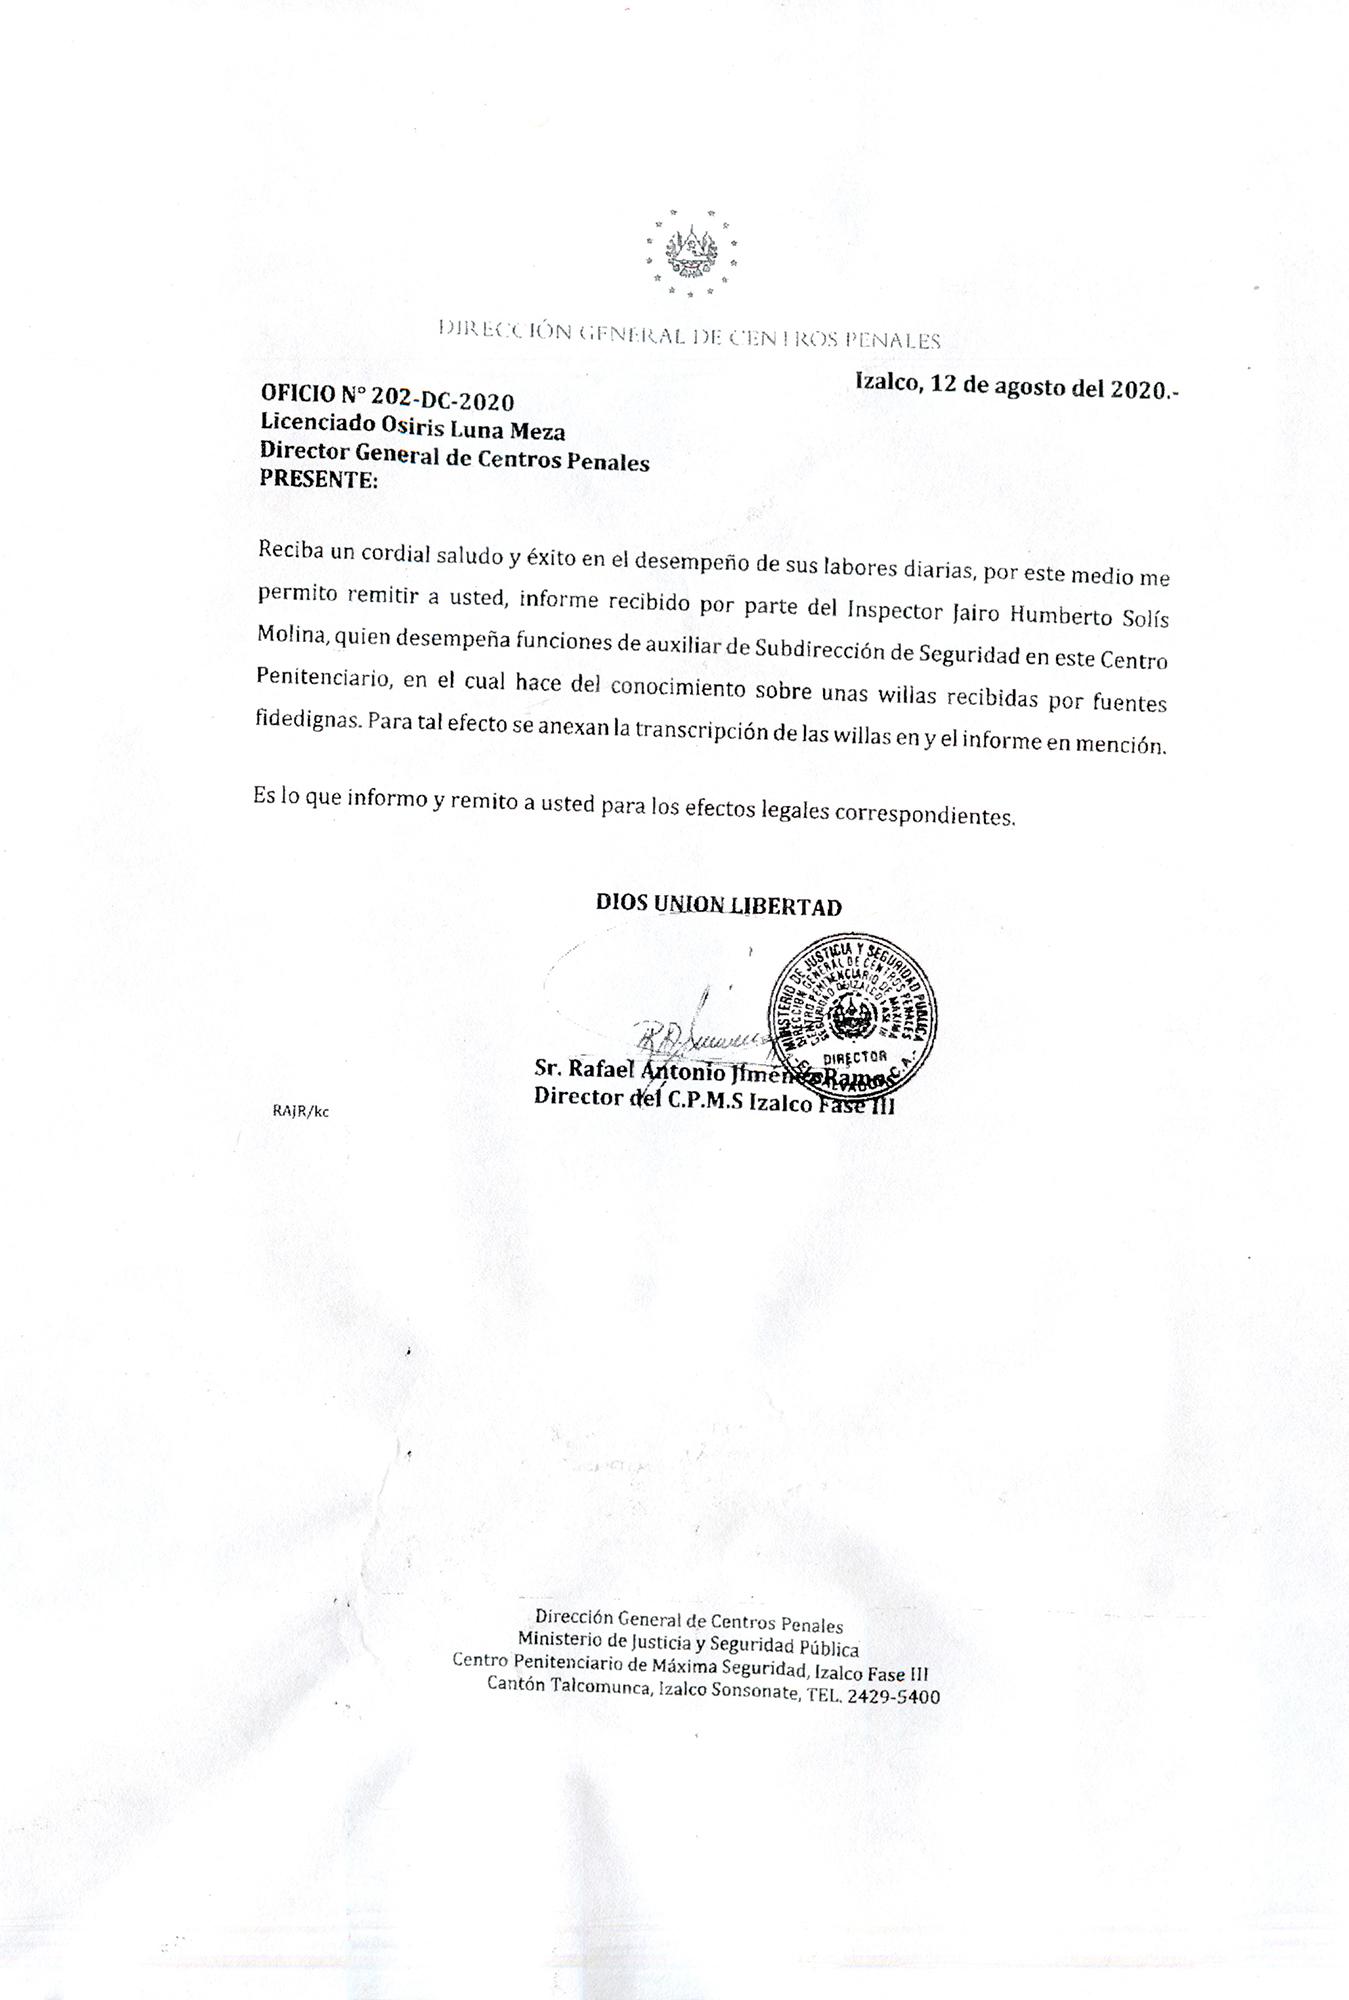 On August 12, 2020, the warden of Phase III of Izalco wrote to Director General Osiris Luna that Inspector Solís Molina of the prison’s security division had written an intelligence report on internal gang communications received from “reliable” sources.